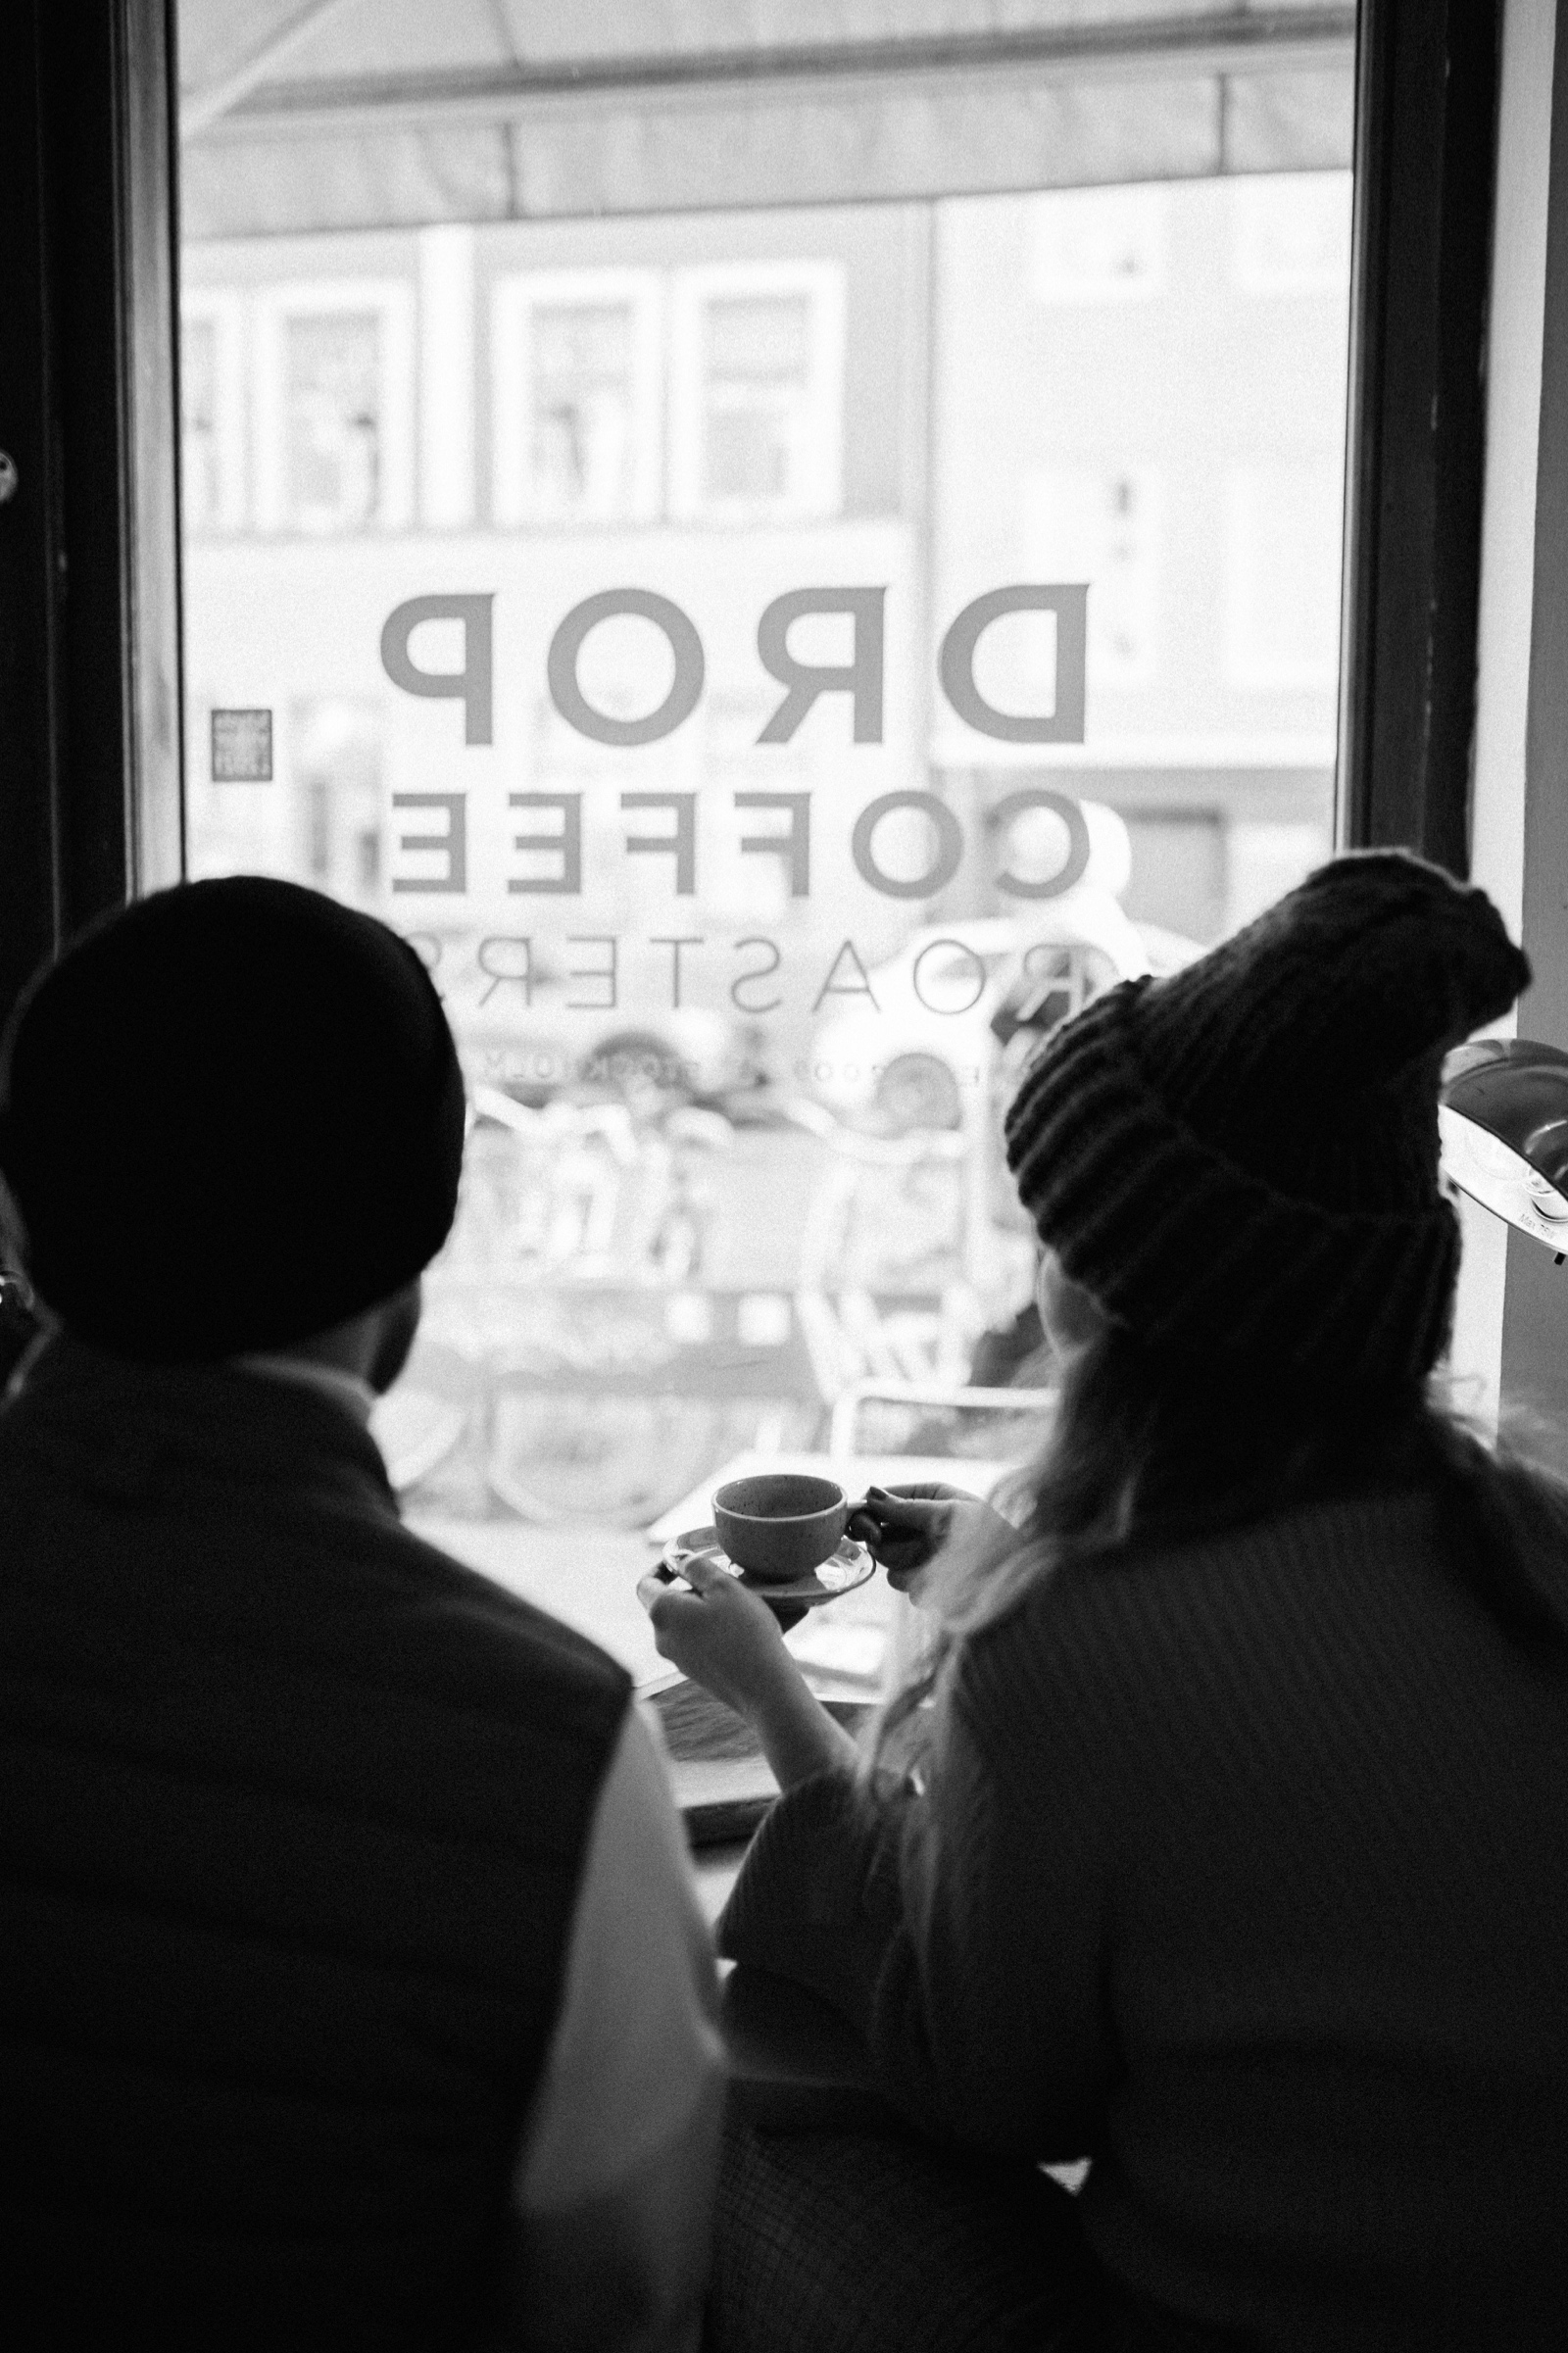 couple drinking coffee in Drop Coffee Roasters Stockholm